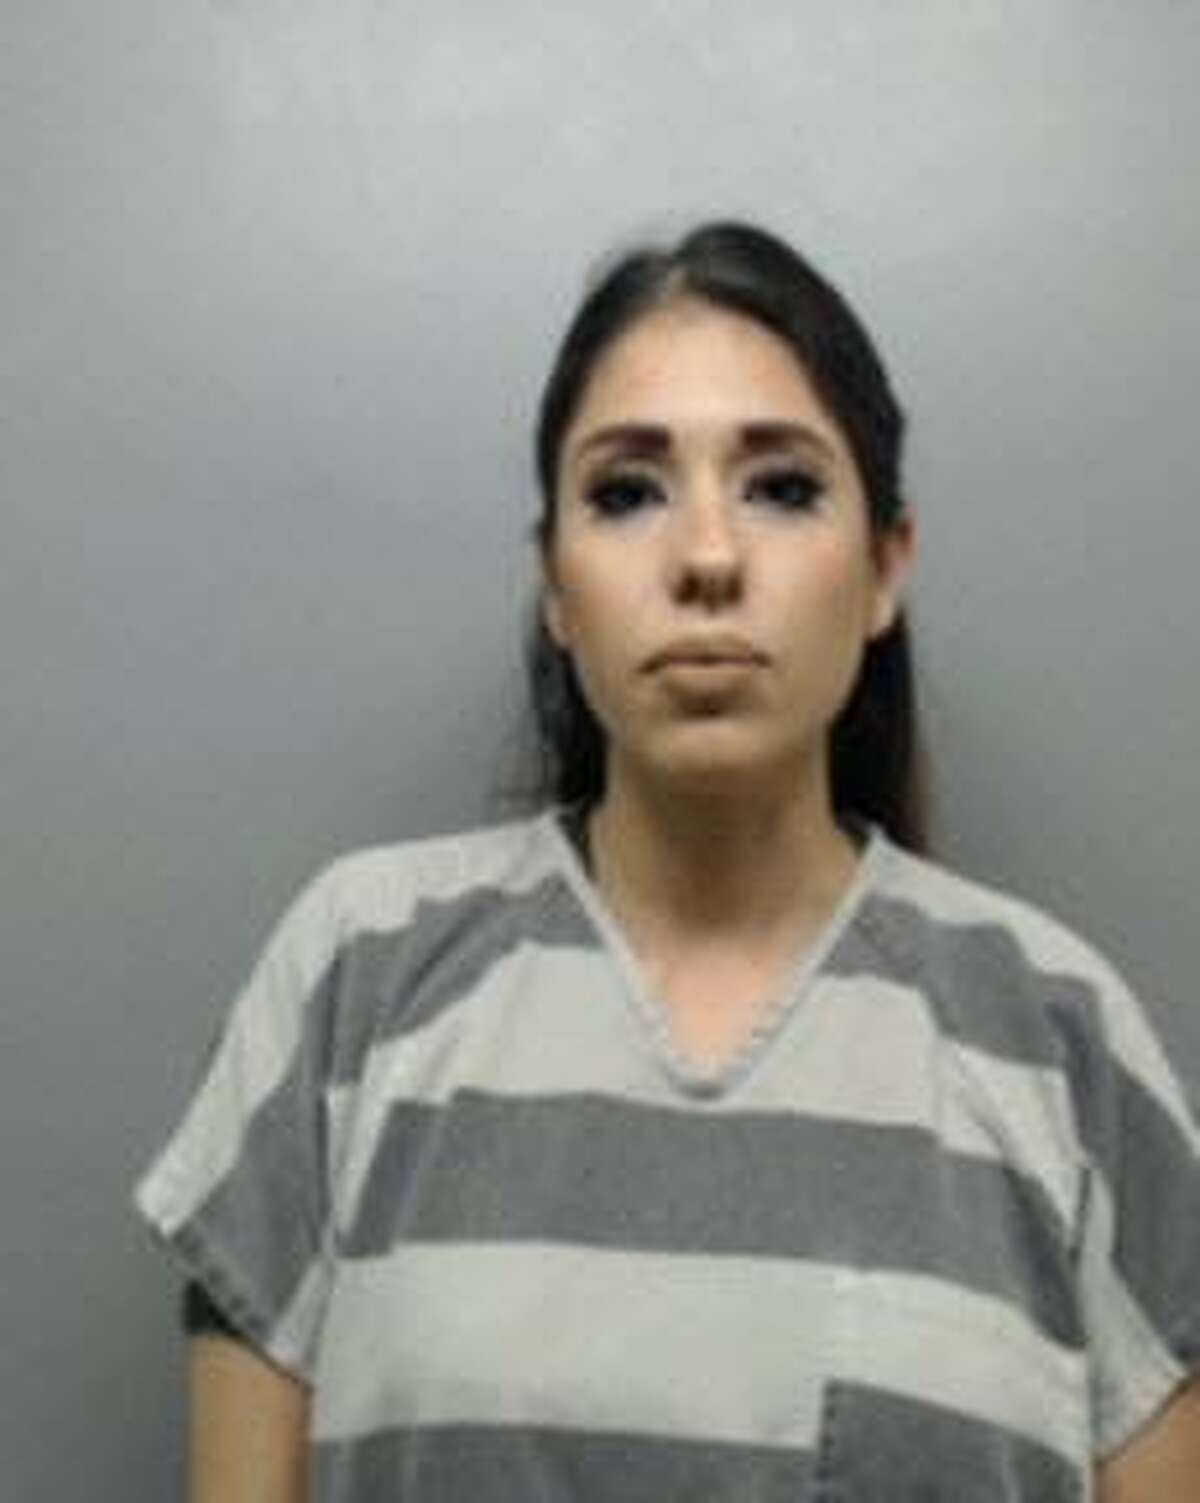 Karla Alvarez is pictured. Keep clicking through to see a gallery of people who smiled in their mugshots.